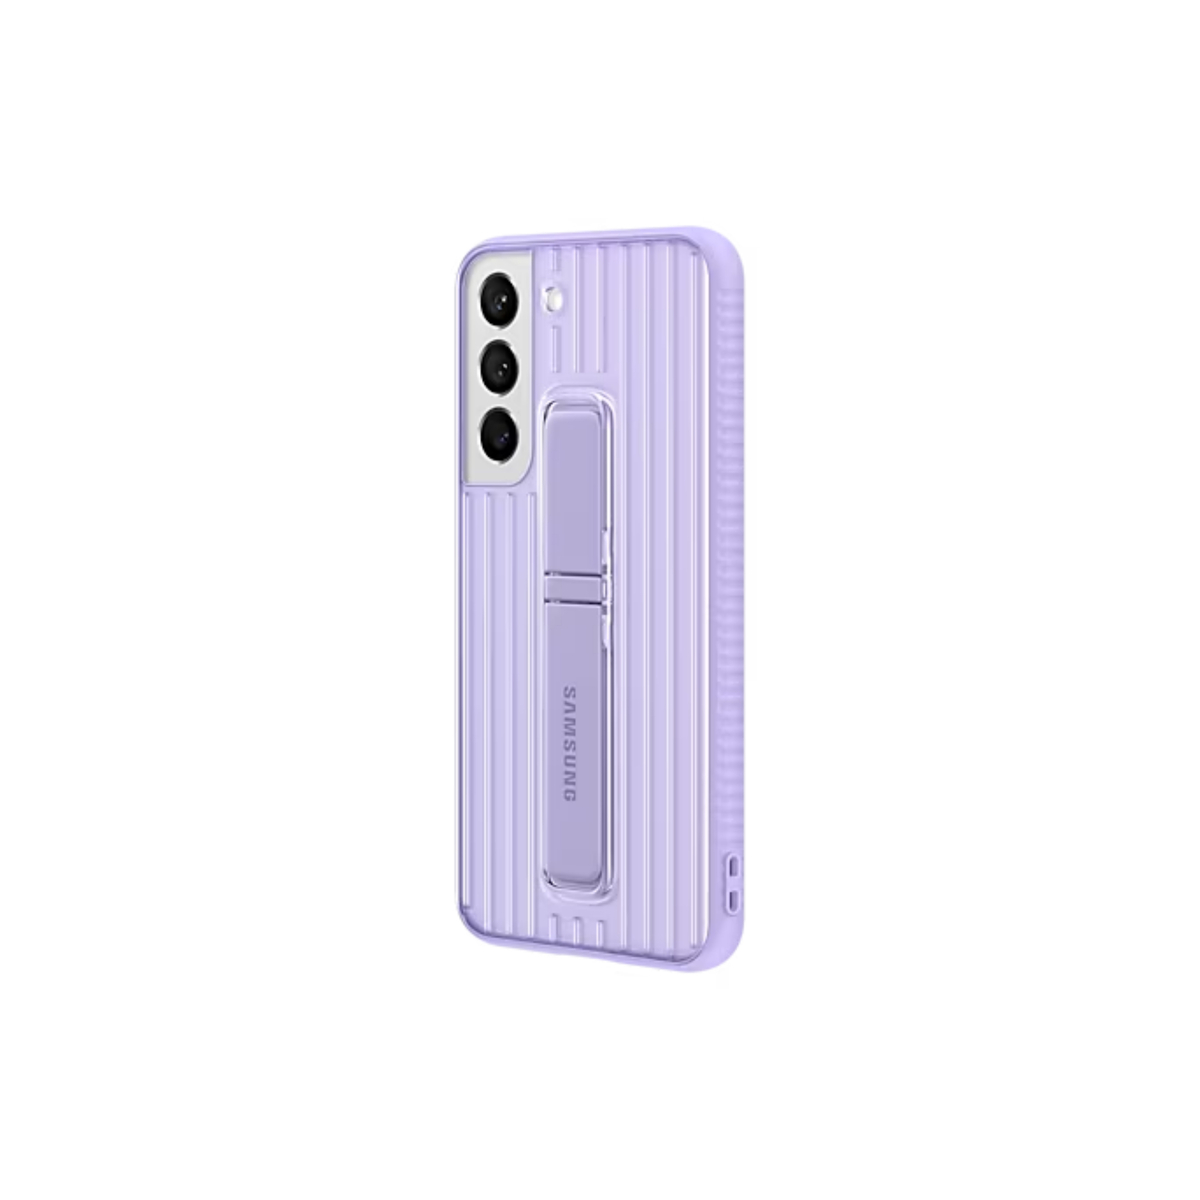 Samsung Protective Standing Cover for Galaxy S22, Lavender, EF-RS901CVEGWW